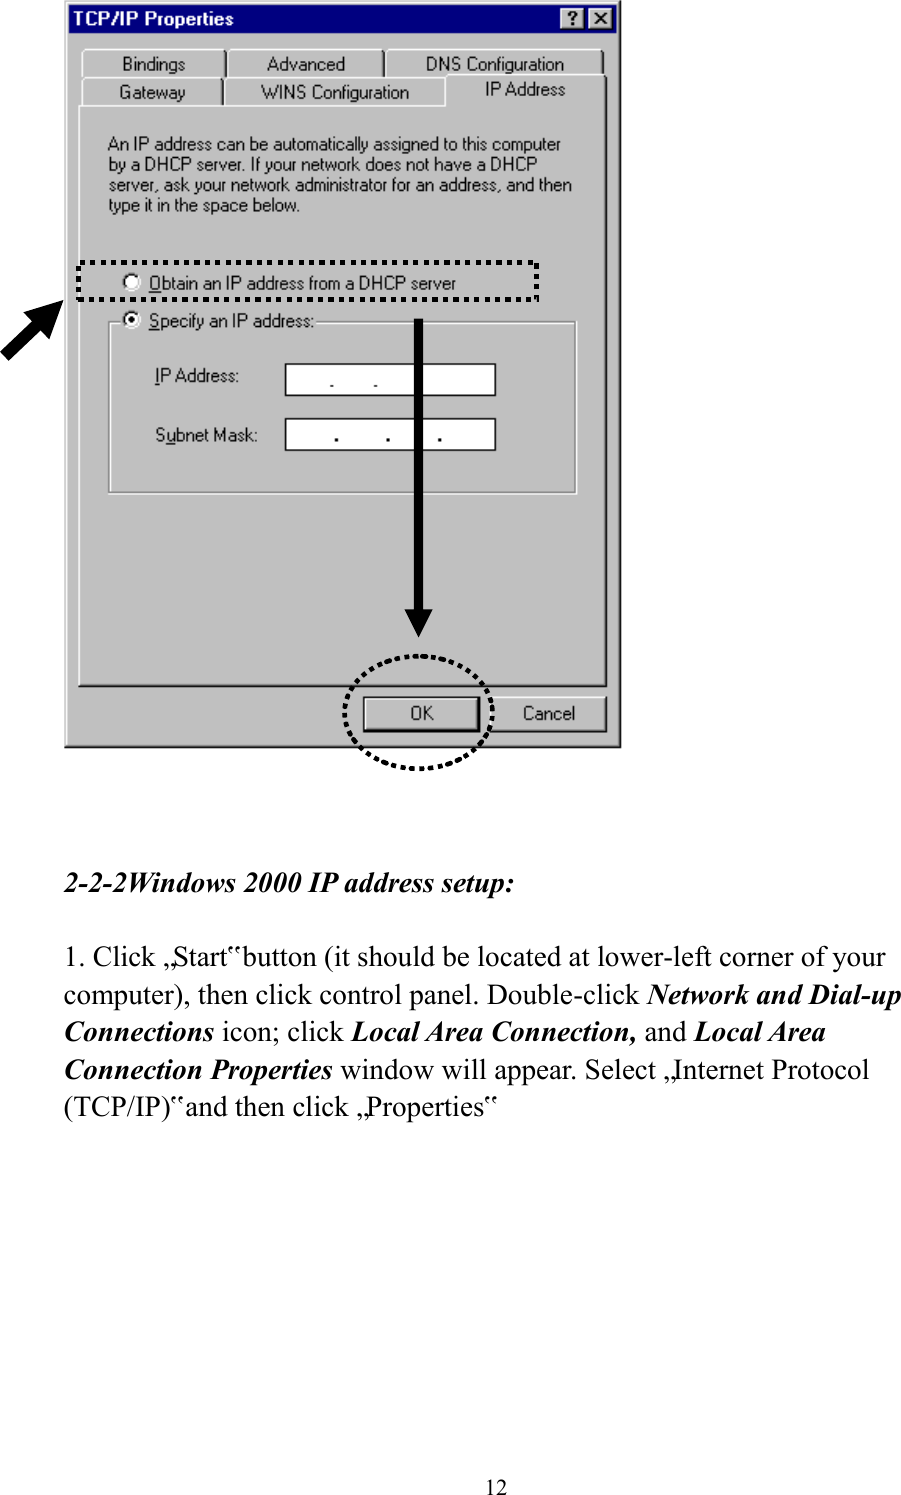  12     2-2-2Windows 2000 IP address setup:  1. Click „Start‟ button (it should be located at lower-left corner of your computer), then click control panel. Double-click Network and Dial-up Connections icon; click Local Area Connection, and Local Area Connection Properties window will appear. Select „Internet Protocol (TCP/IP)‟ and then click „Properties‟    